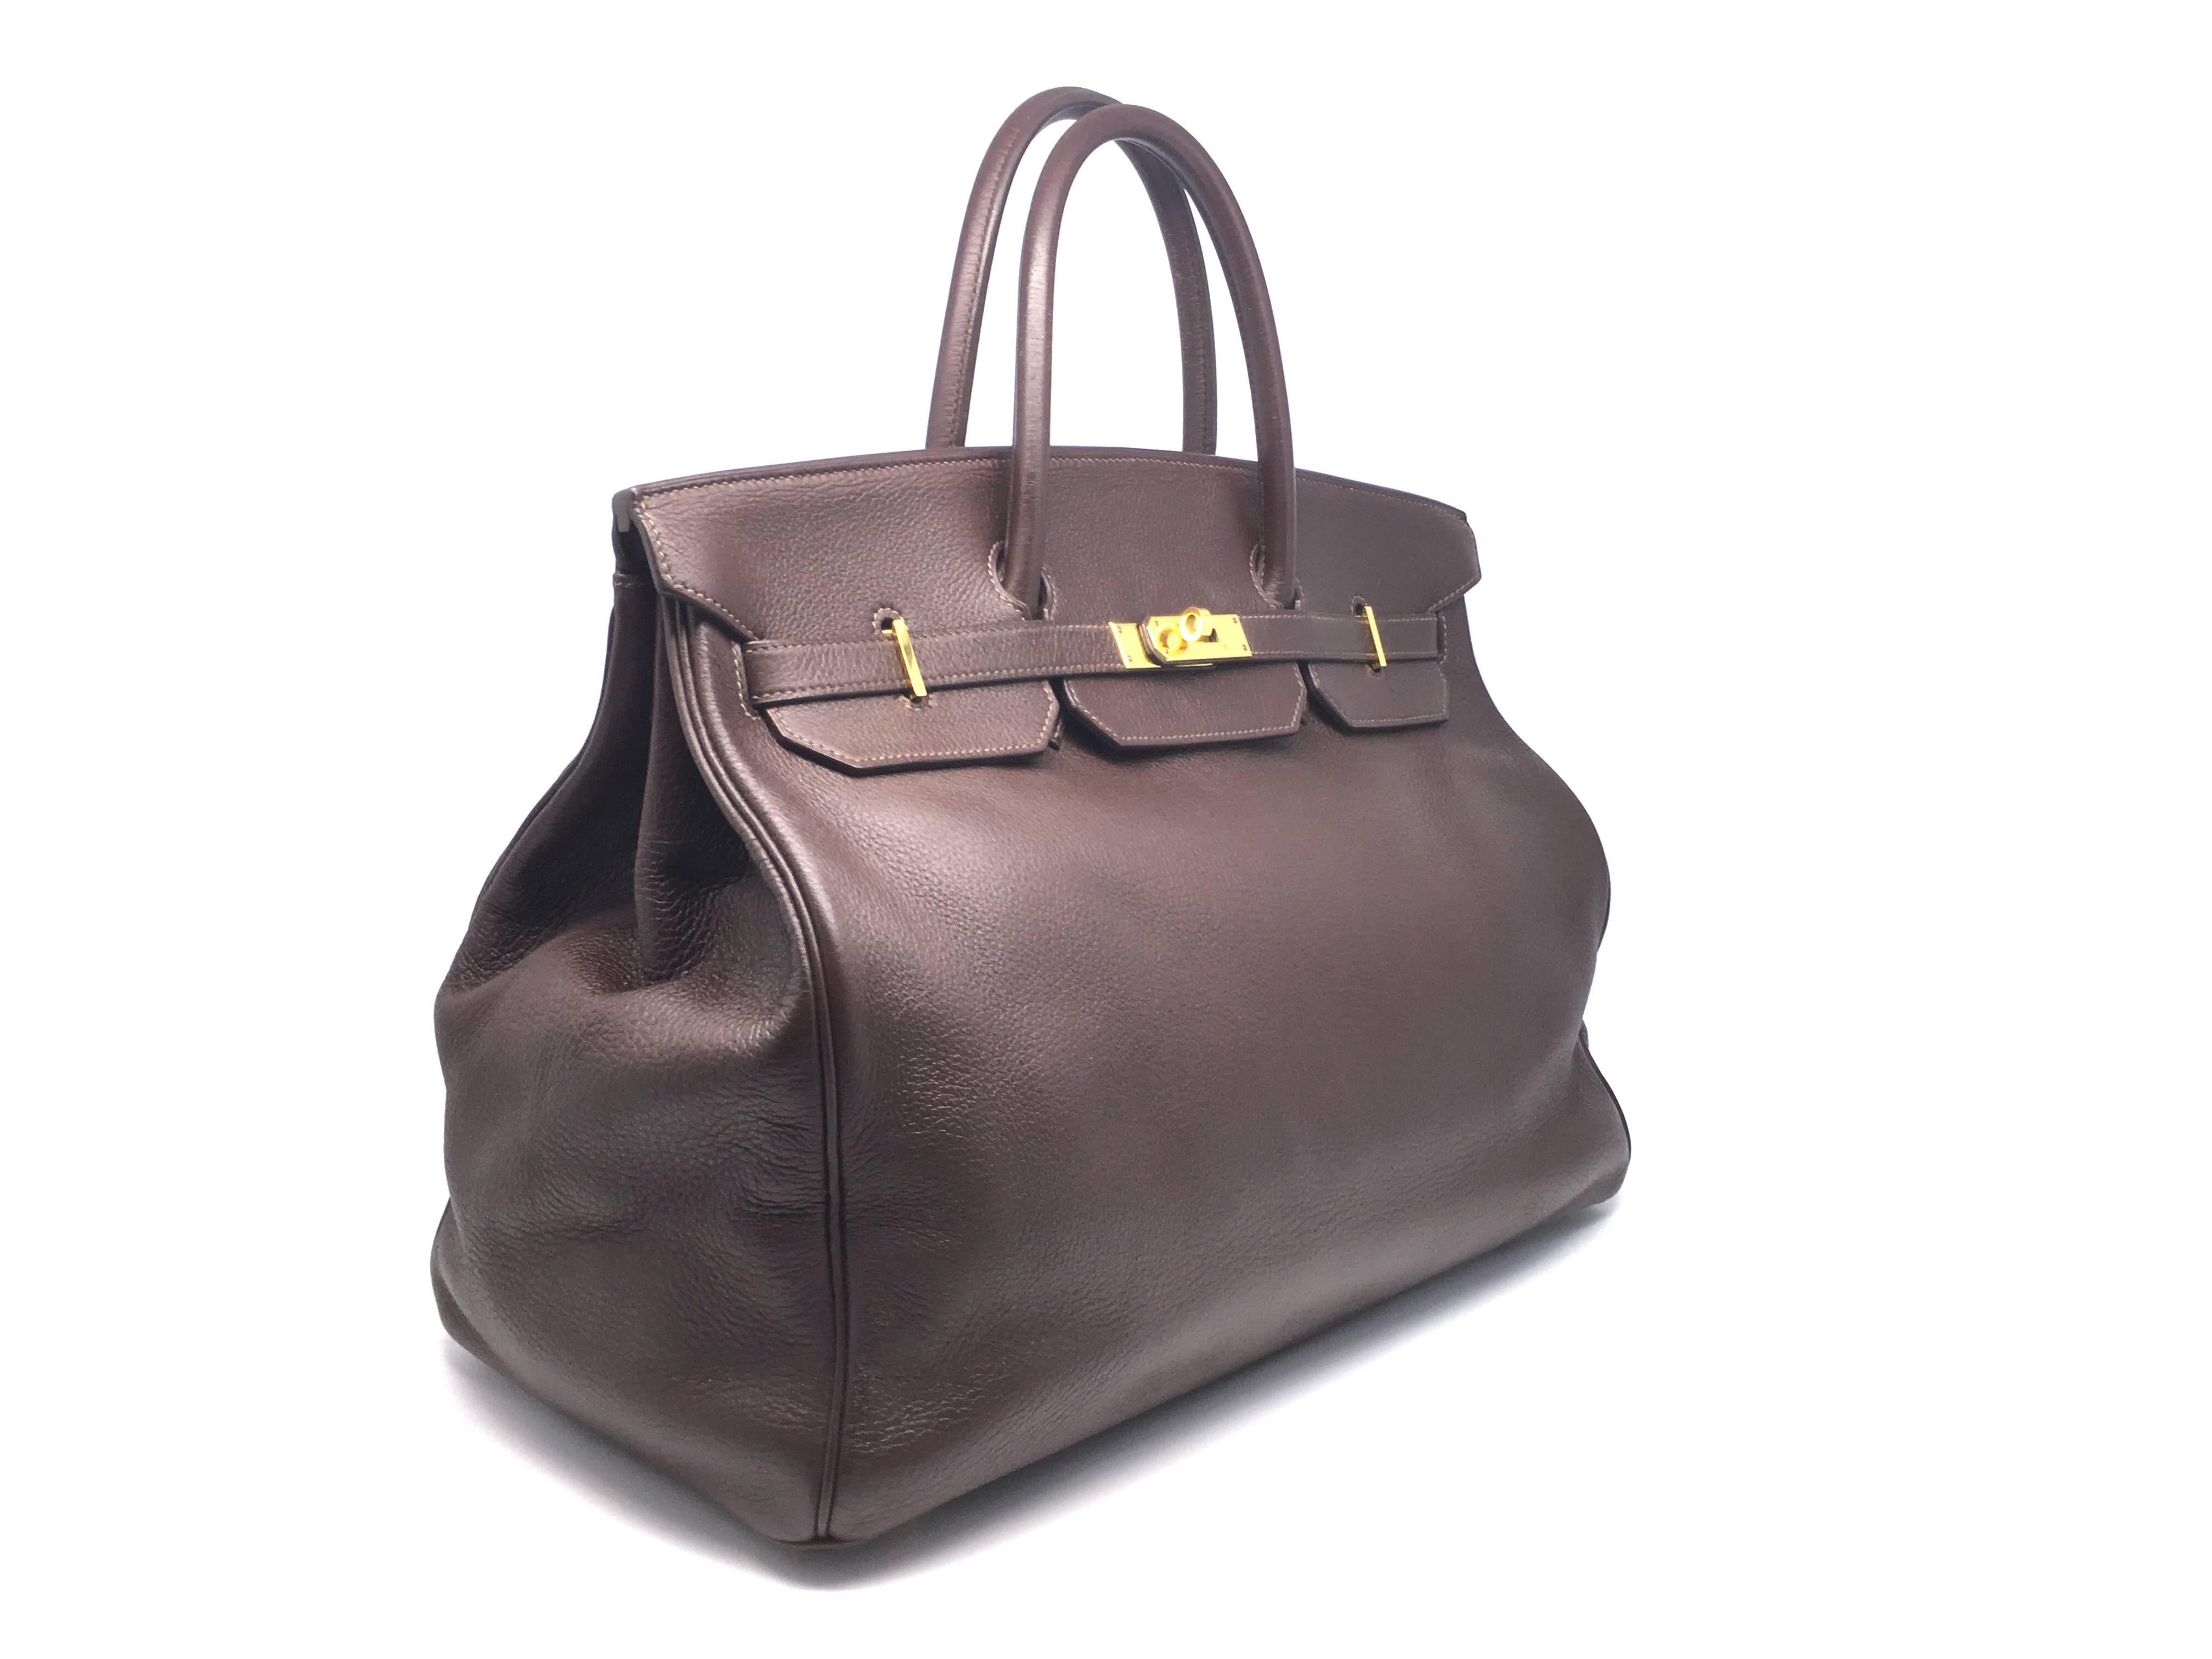 Color: Chocolate Brown / Chocolat (designer color)
Material: Taurillon Clemence Leather

Condition:
Rank A
Overall: Good, few minor defects
Surface: Good
Corners: Minor Scratches
Edges: Minor Scratches
Handles/Straps: Good
Hardware: